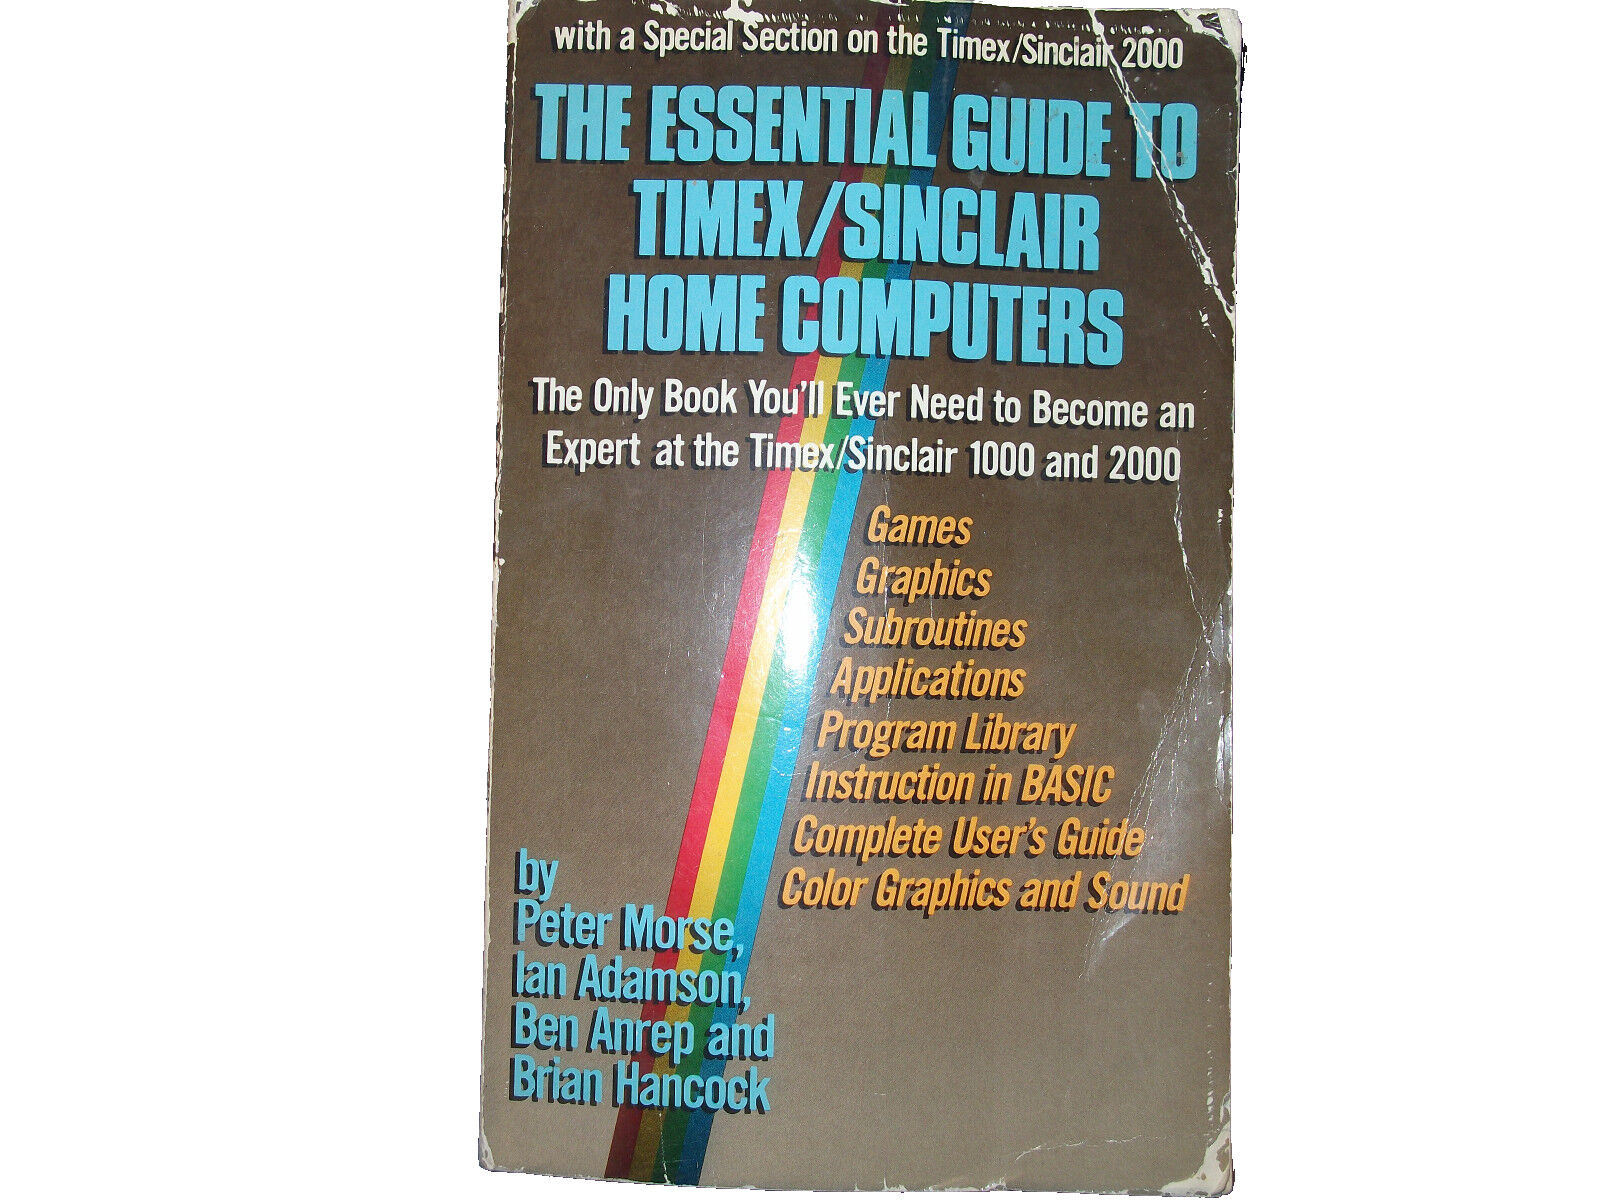 ESSENTIAL GUIDE TIMEX SINCLAIR HOME COMPUTERS  VINTAGE 1983 COLLECTIBLE BOOK